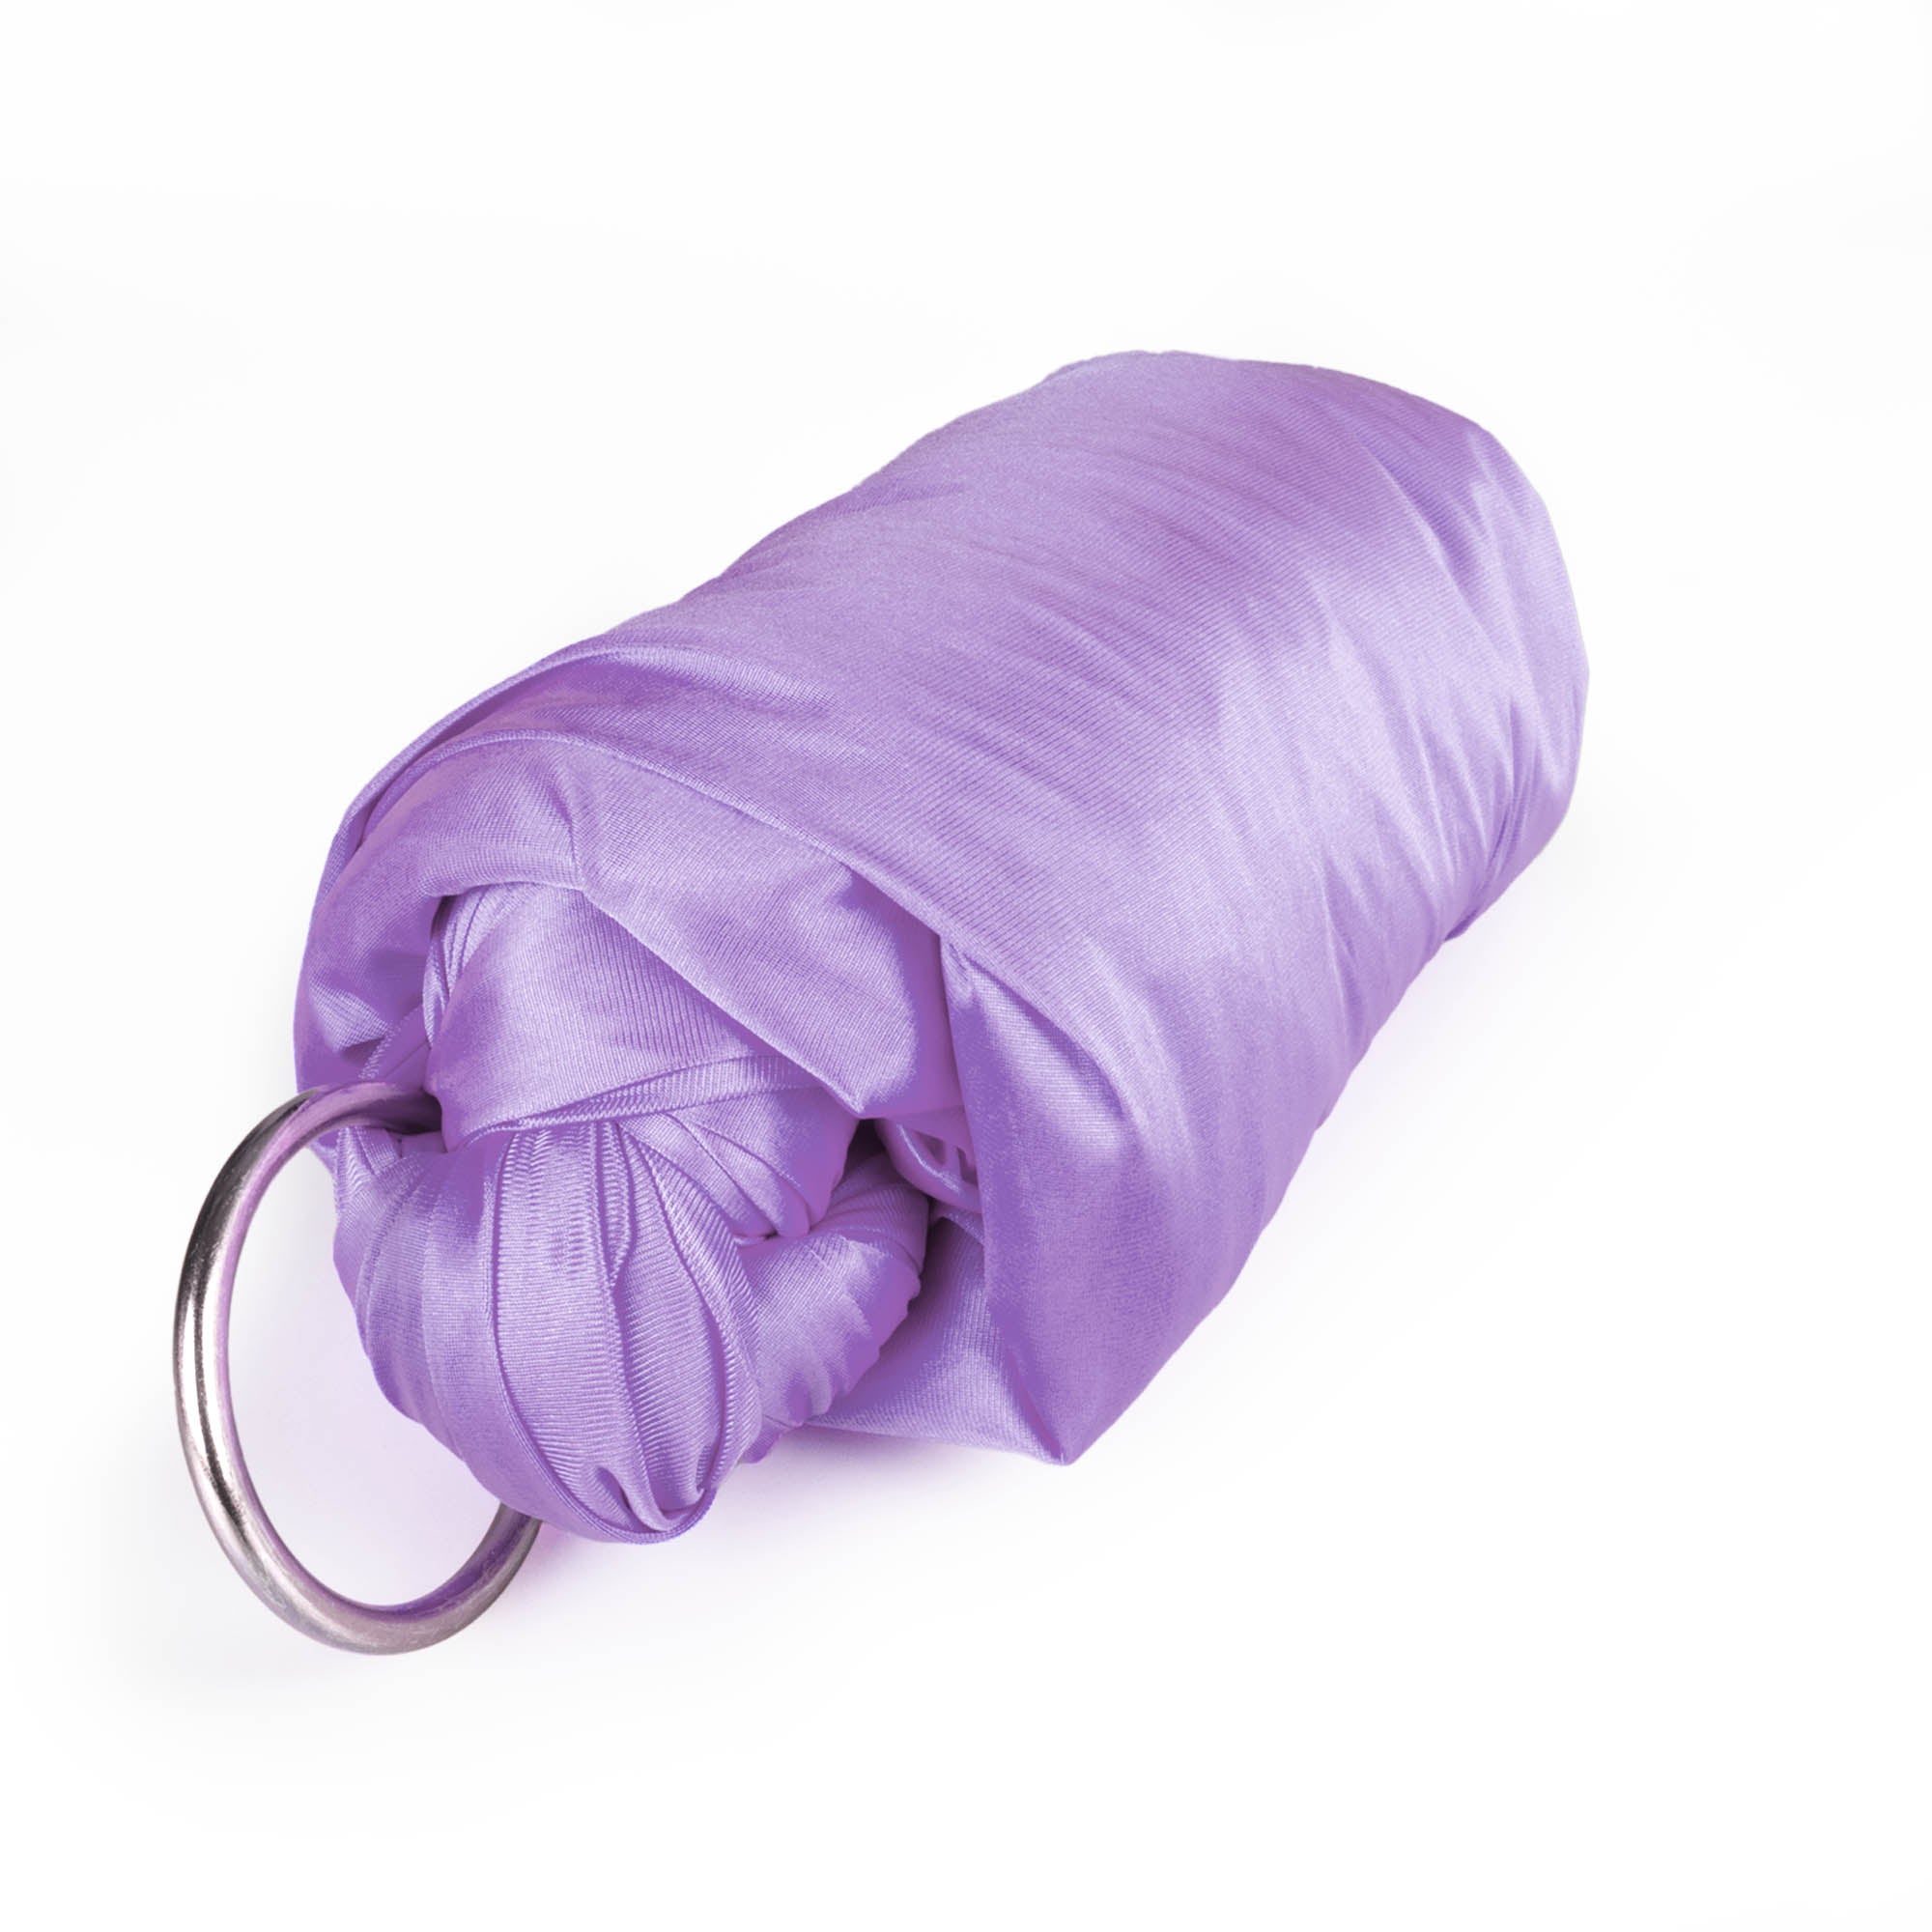 Lavender yoga hammock with O rings attached